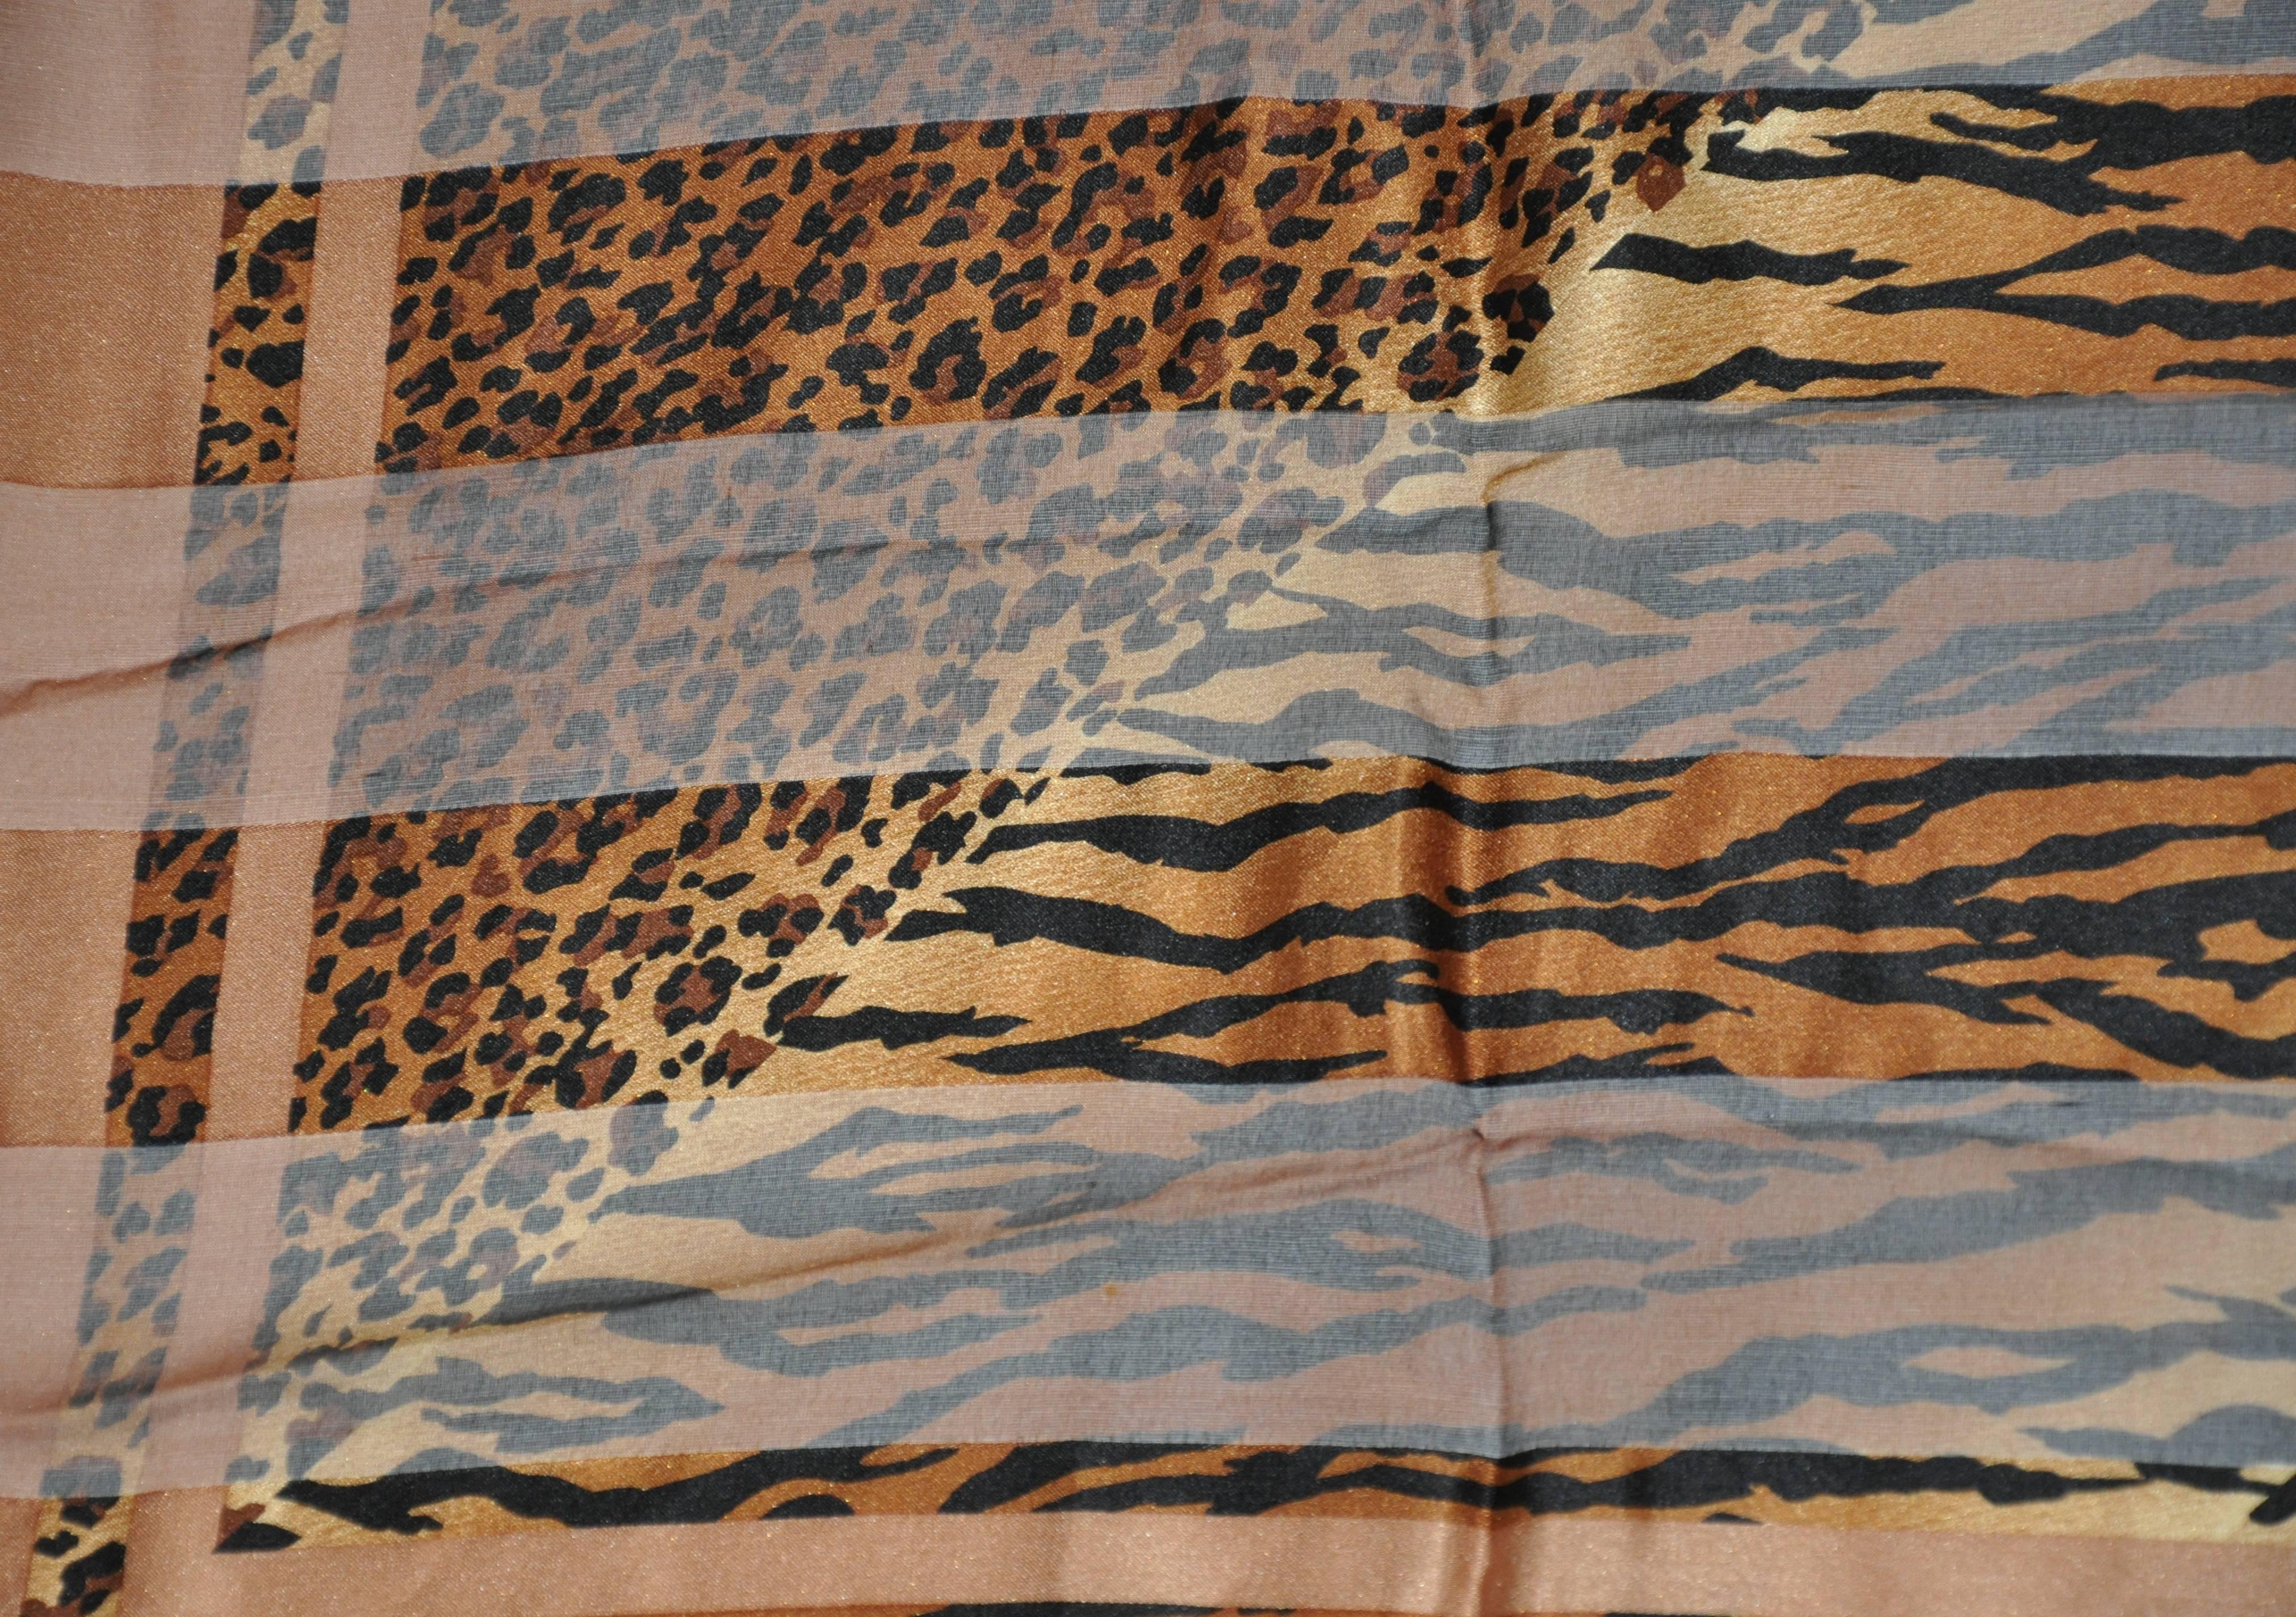 Adrienne Vittadini "multi-size leopard print" combination of silk and silk chiffon scarf measures 34" x 34". Made in Italy.